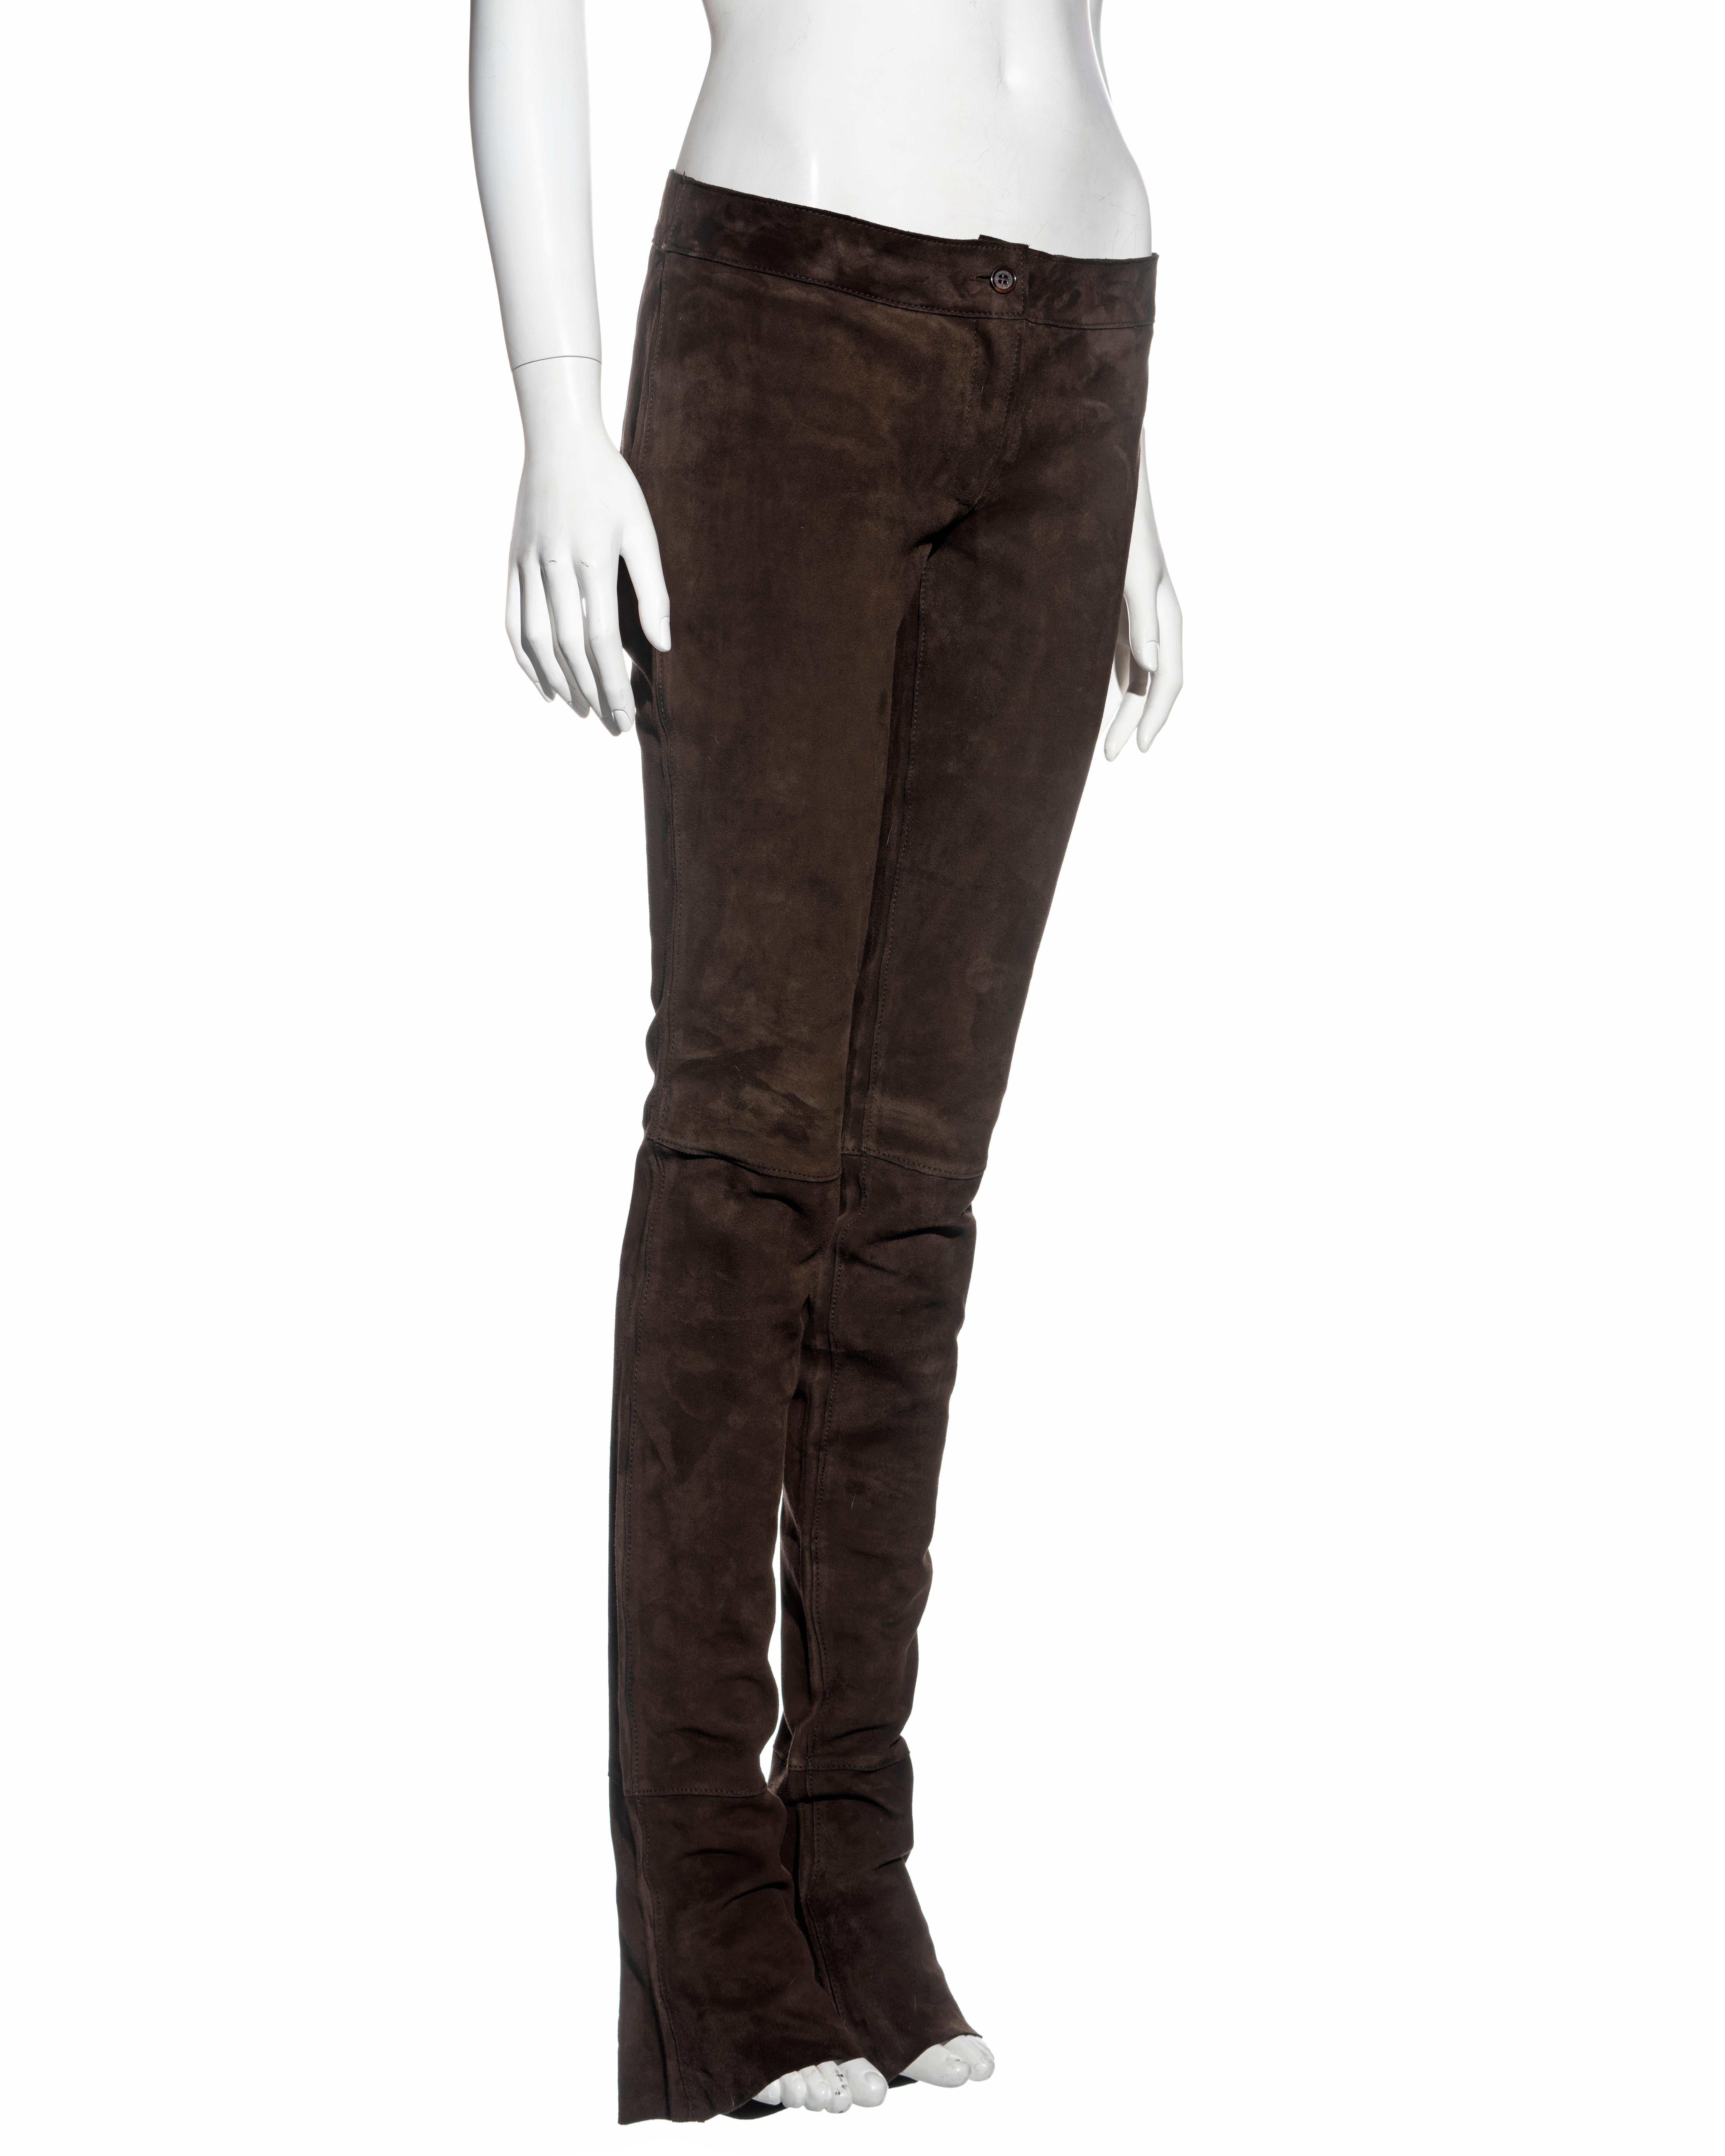 Women's Dolce & Gabbana low rise extra long ruched brown leather pants, fw 2001